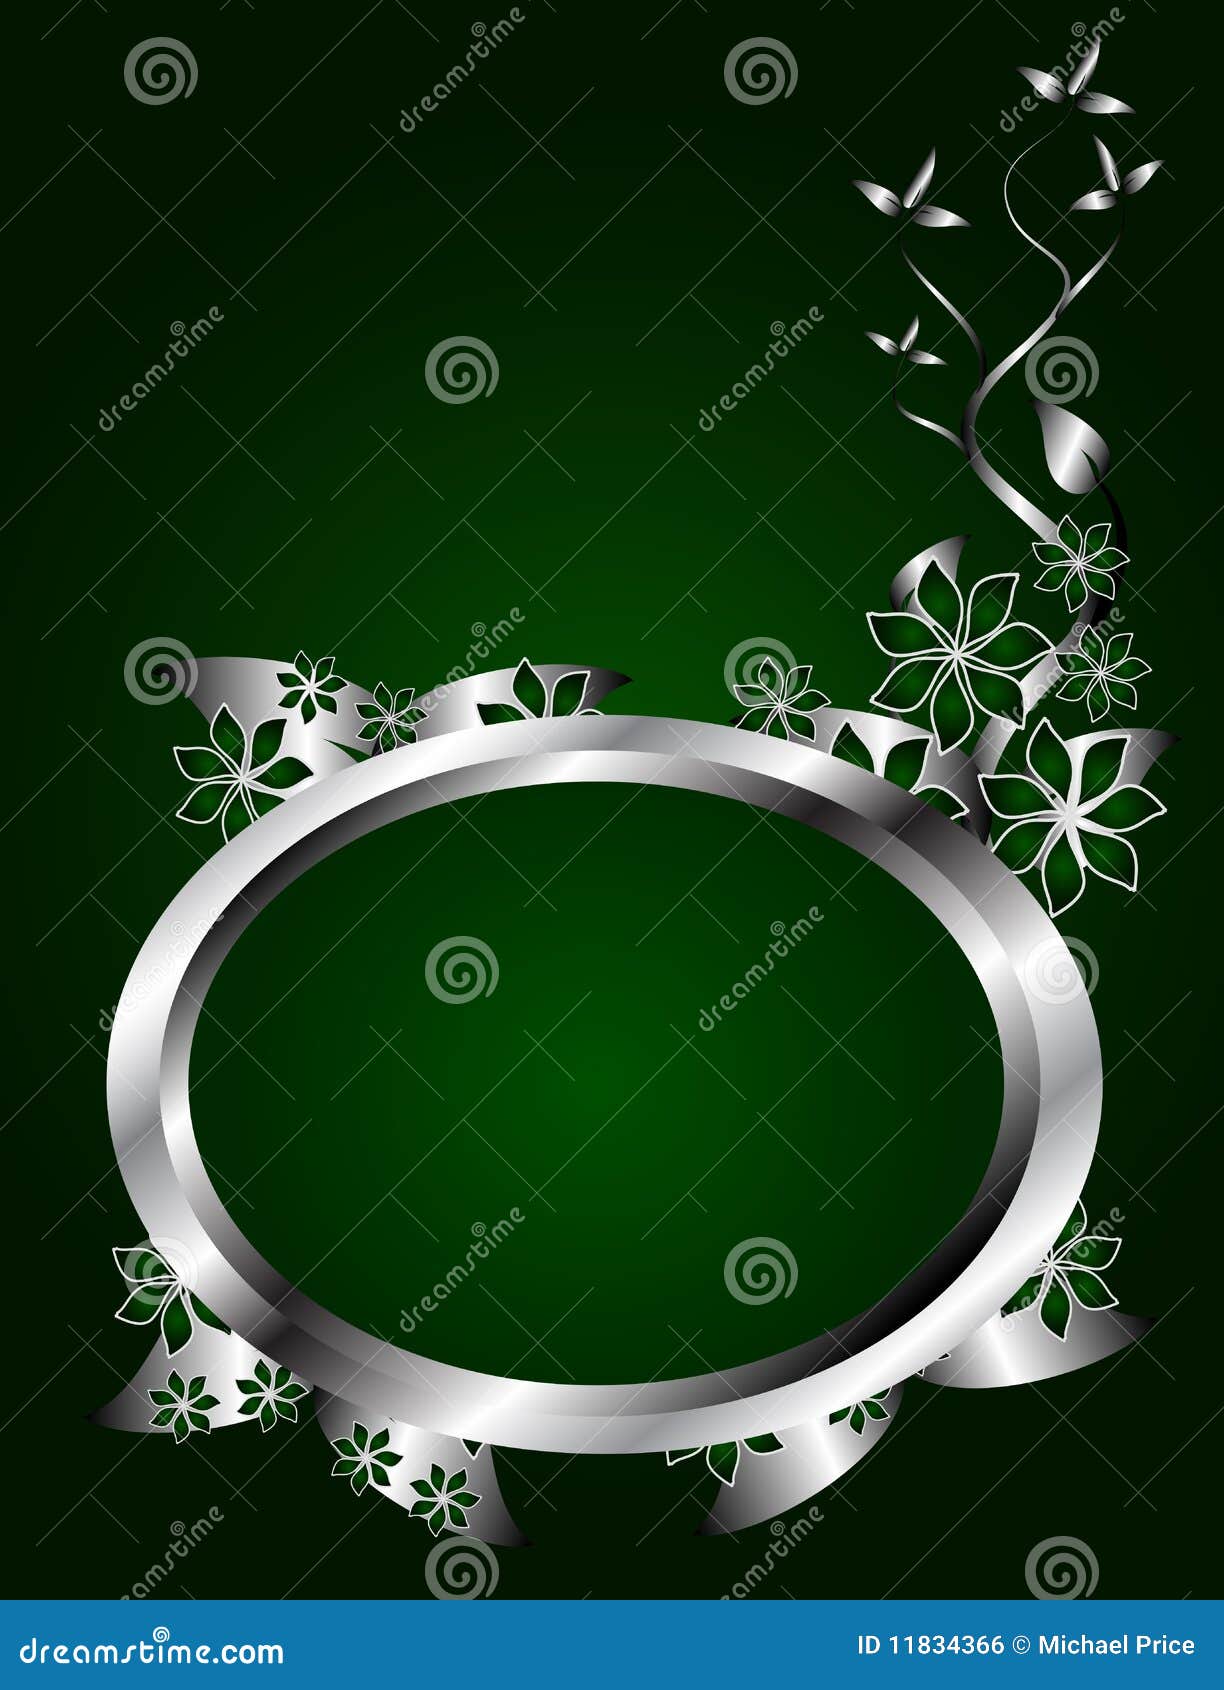 Silver And Green Floral Background Stock Vector - Illustration of green